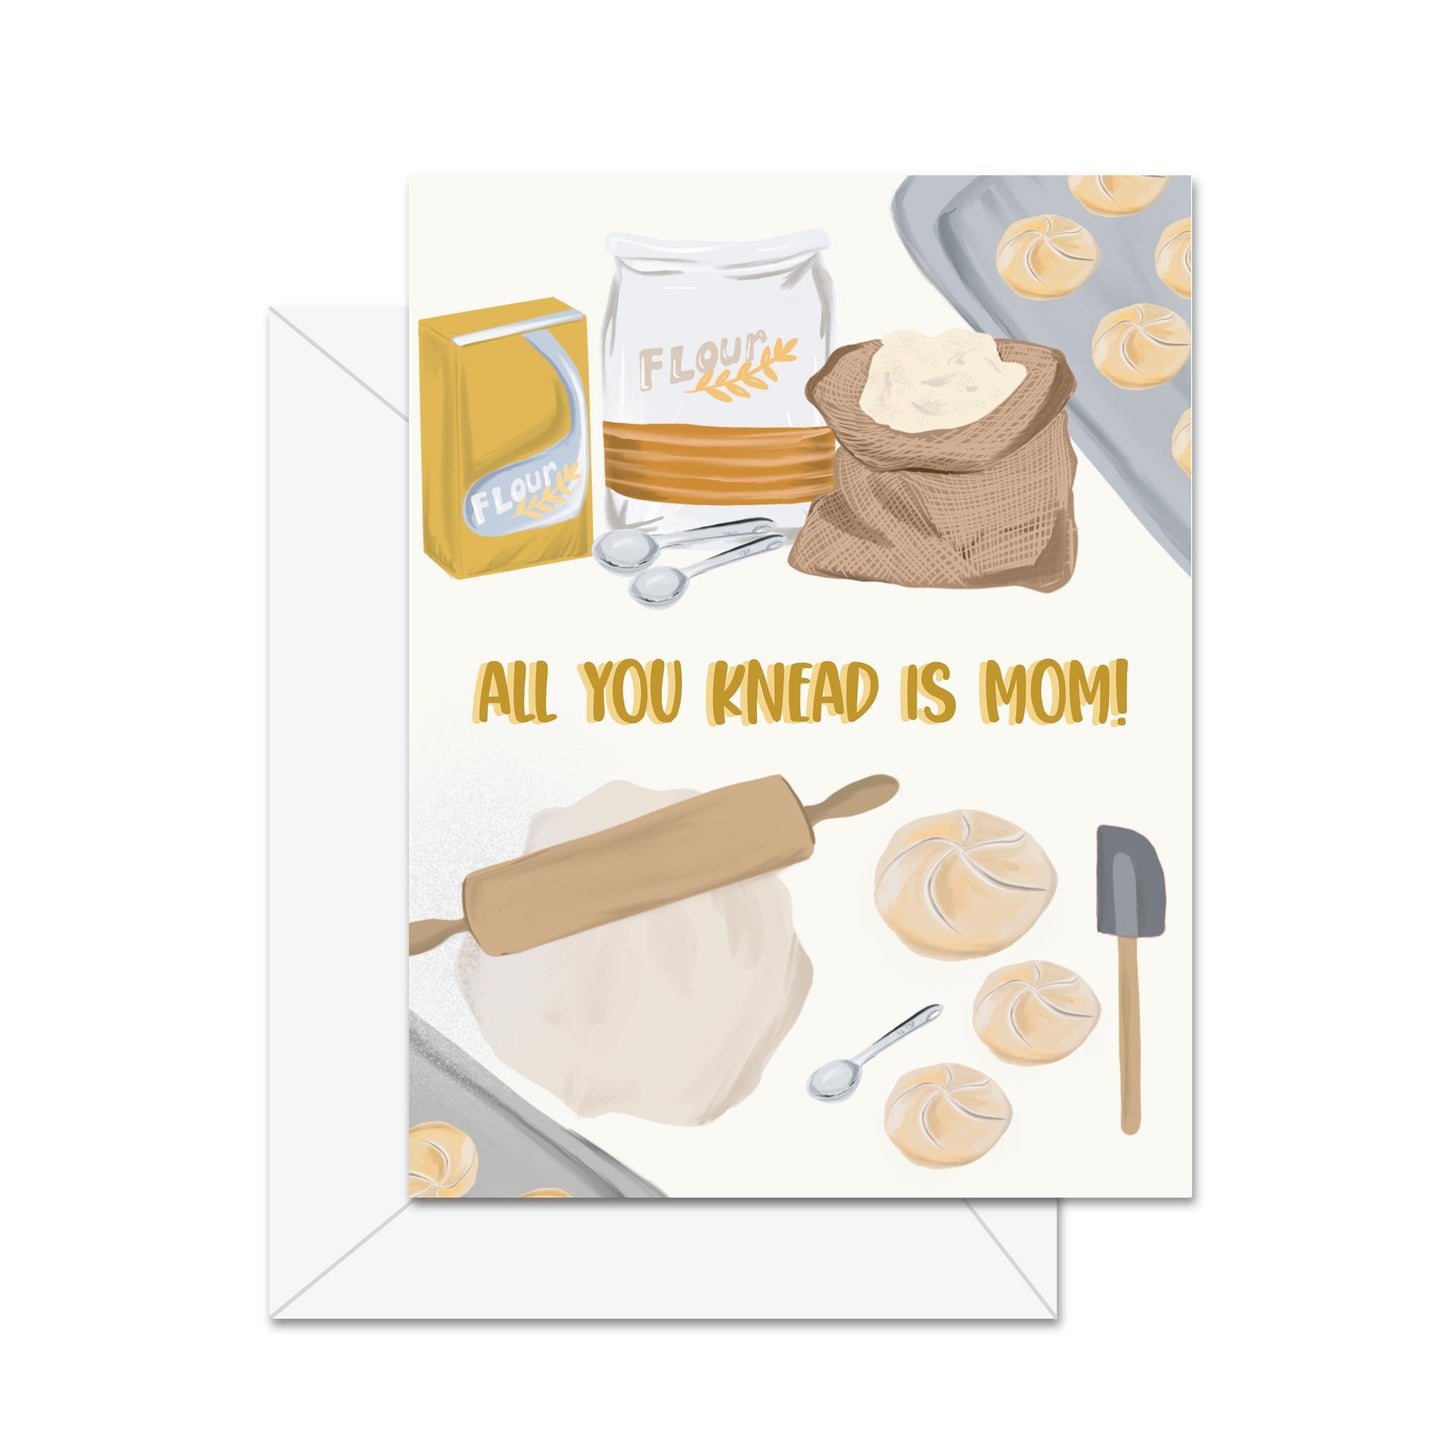 All You Knead Is Mom! - Greeting Card